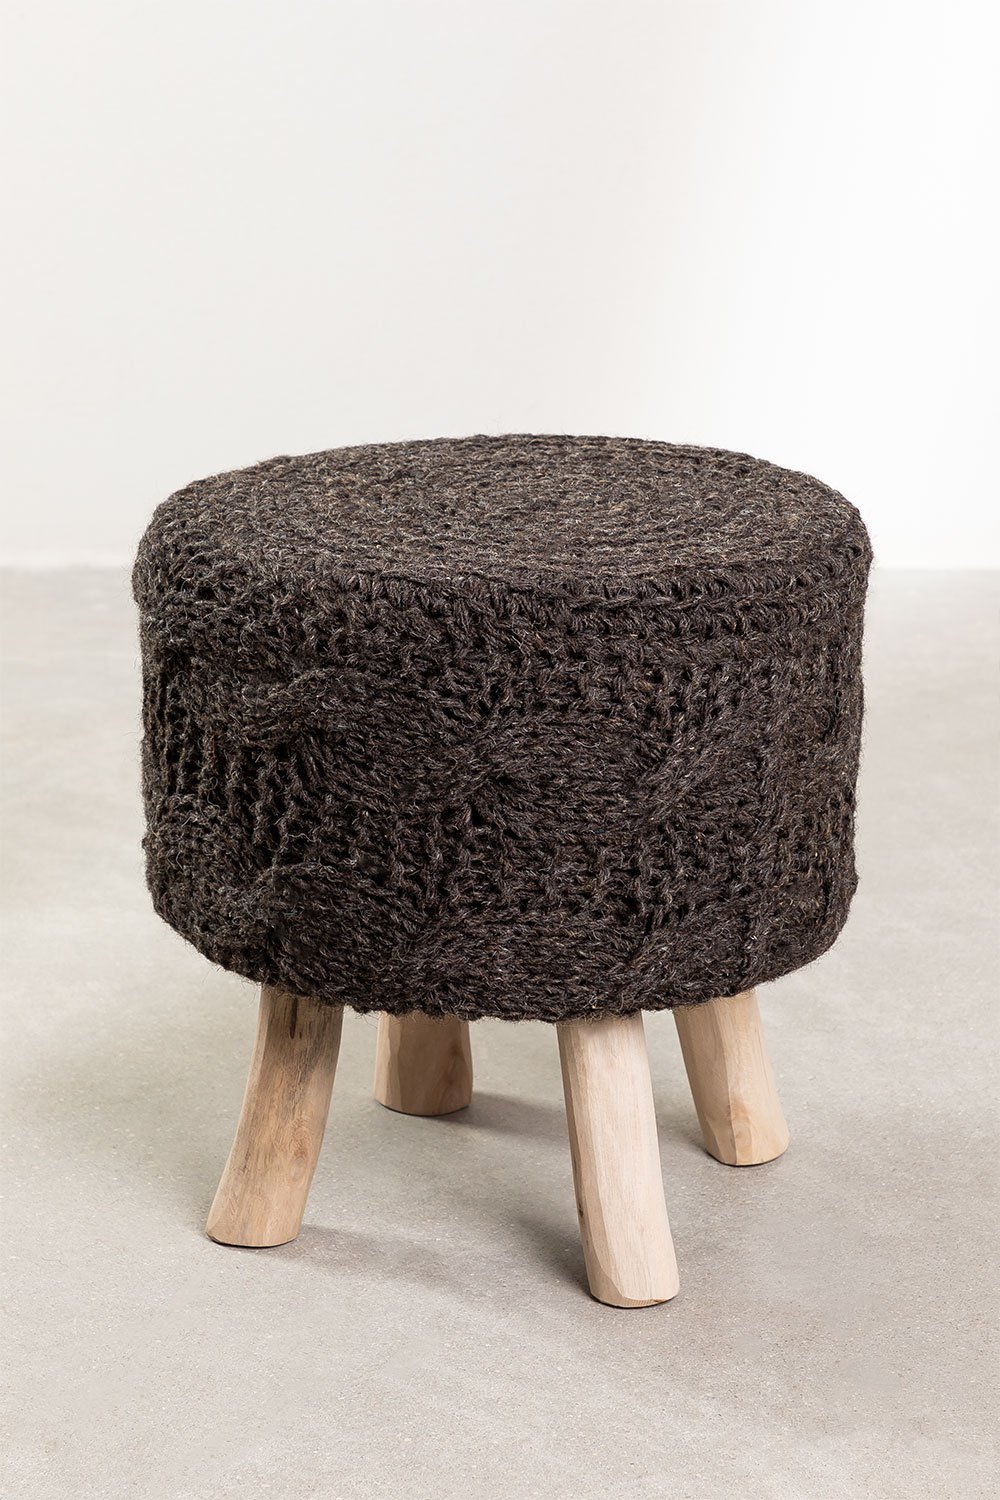 Low Round Wool & Wooden Stool Rixar, gallery image 1